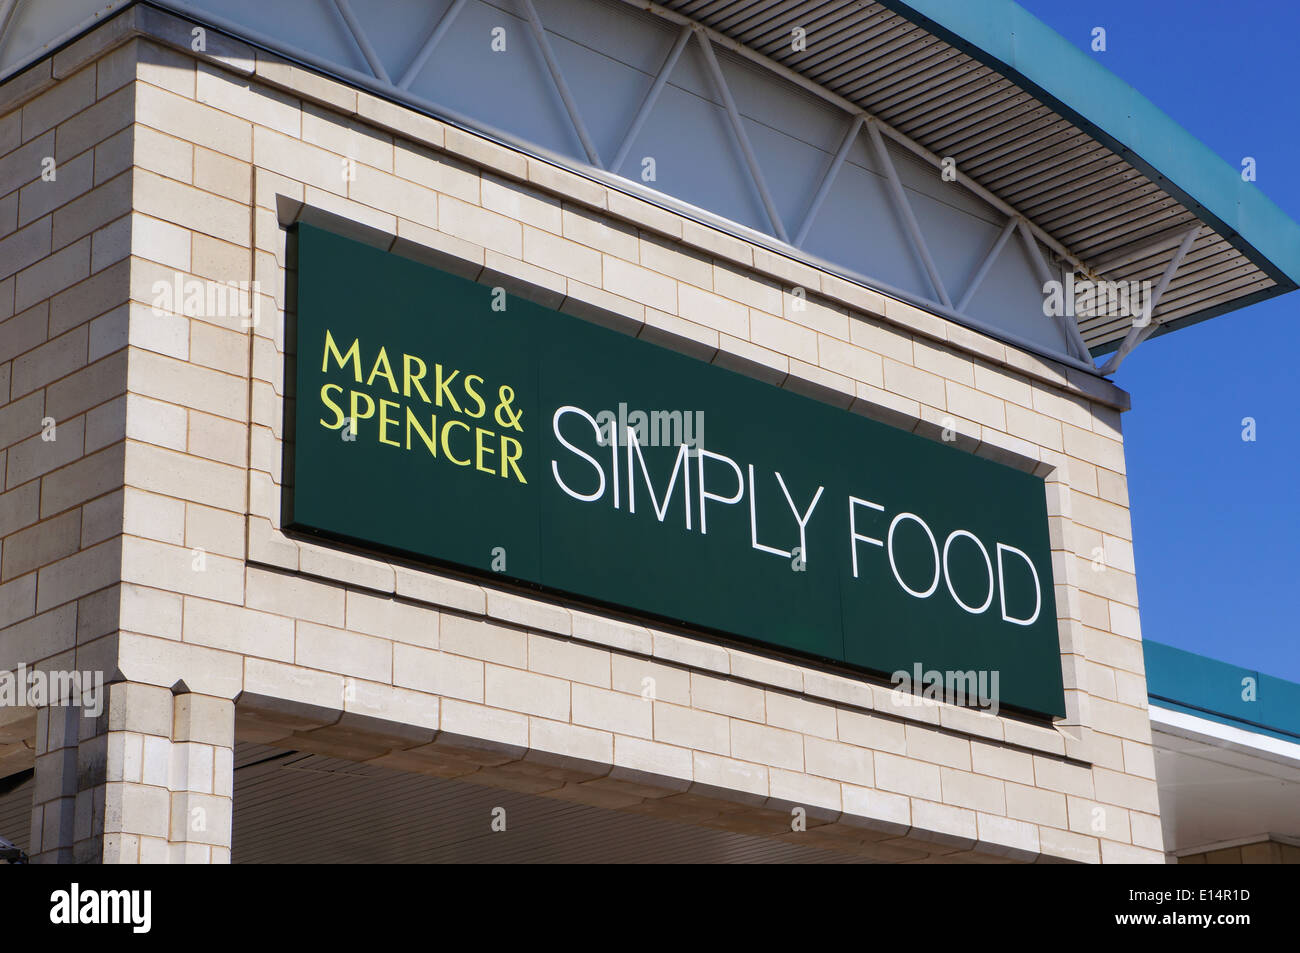 Marks And Spencer Food High Resolution Stock Photography and Images - Alamy